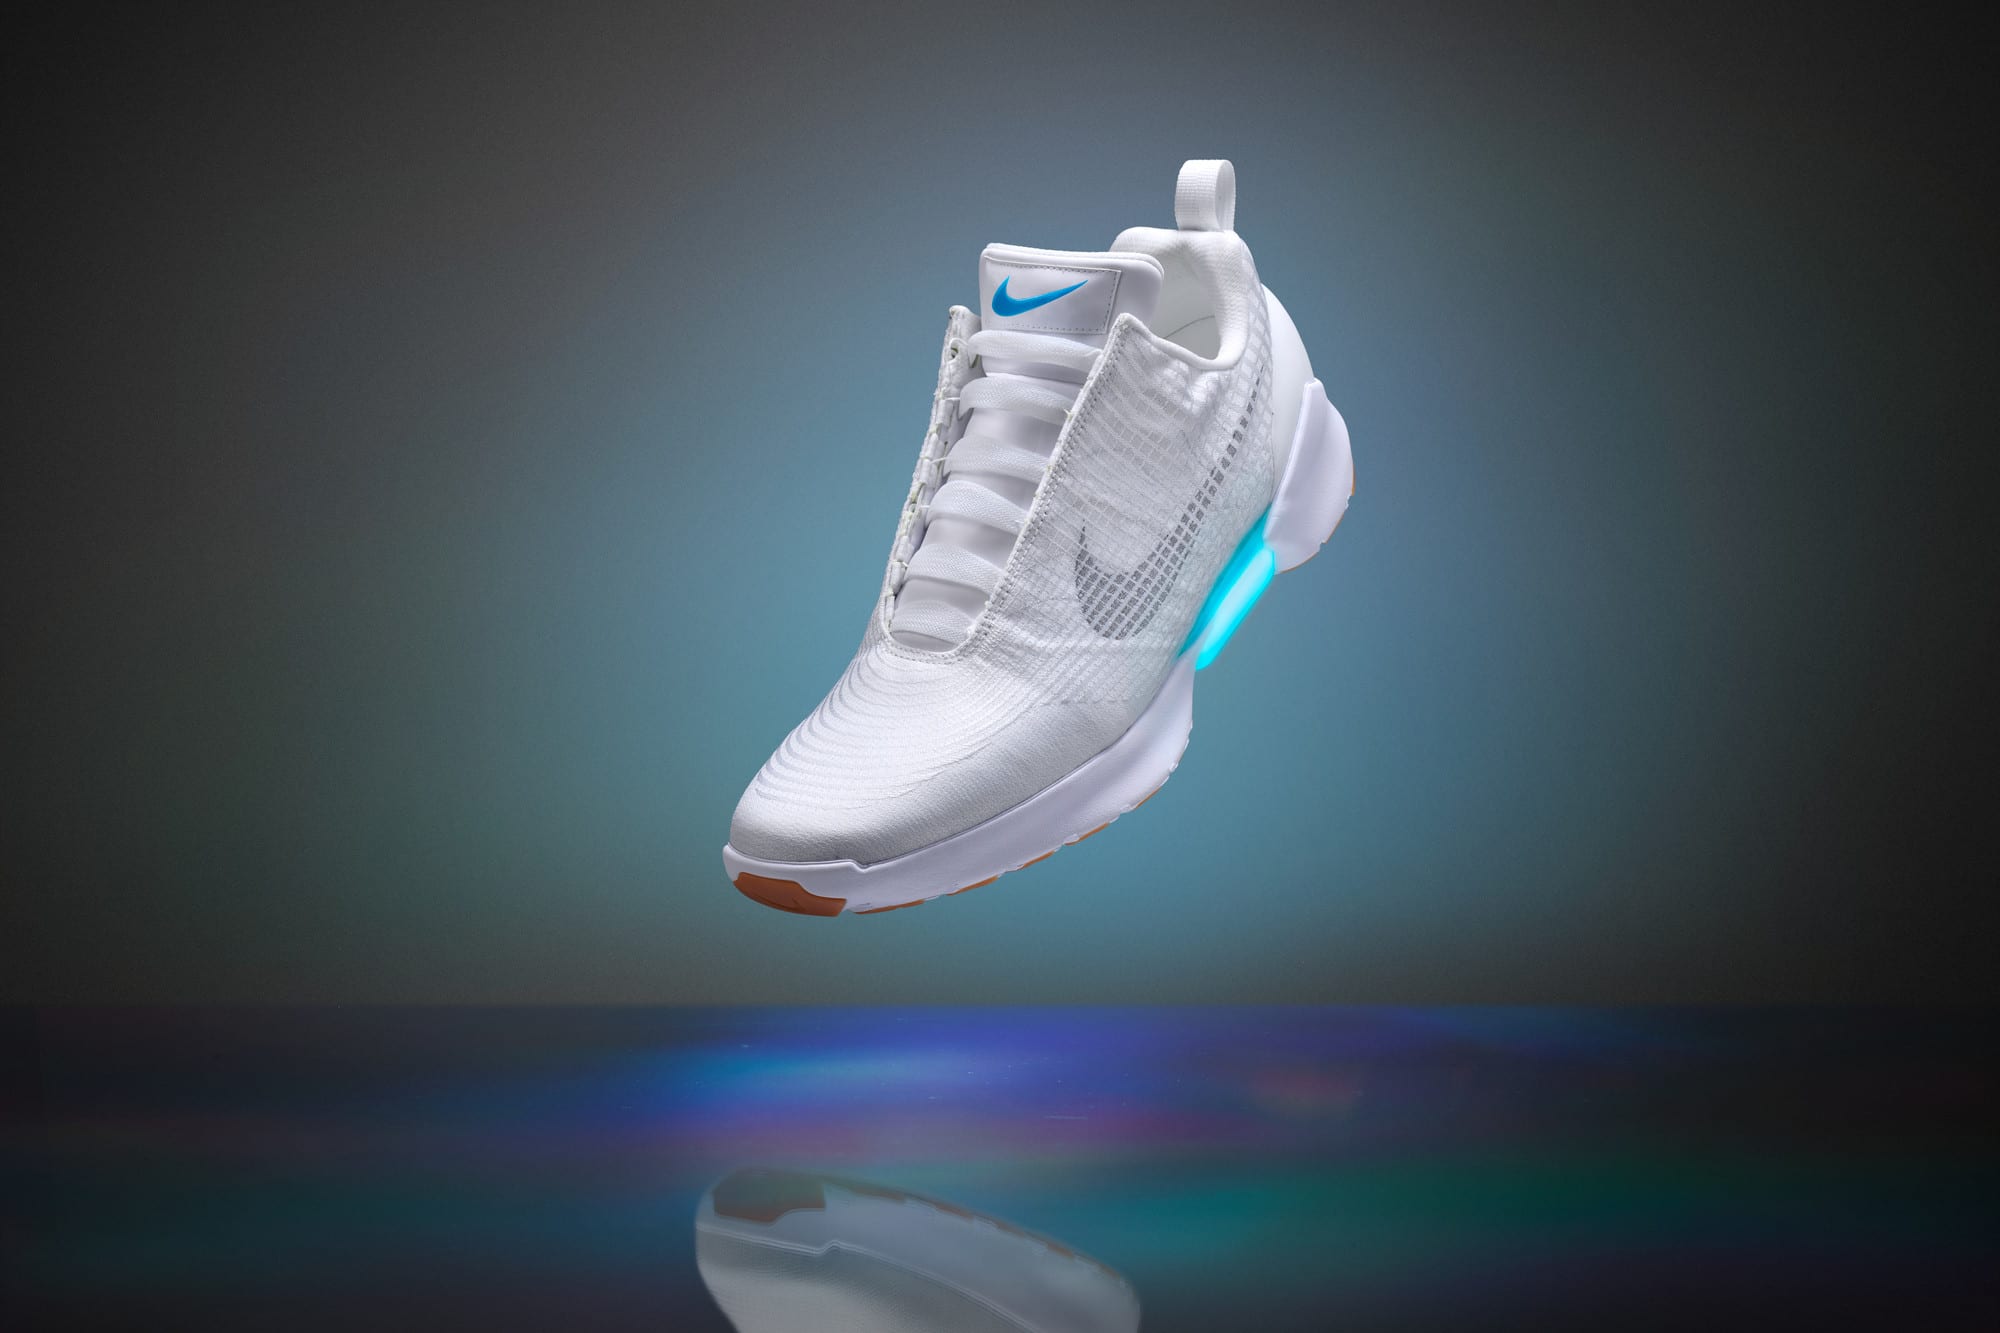 back to the future part 2 nike shoes